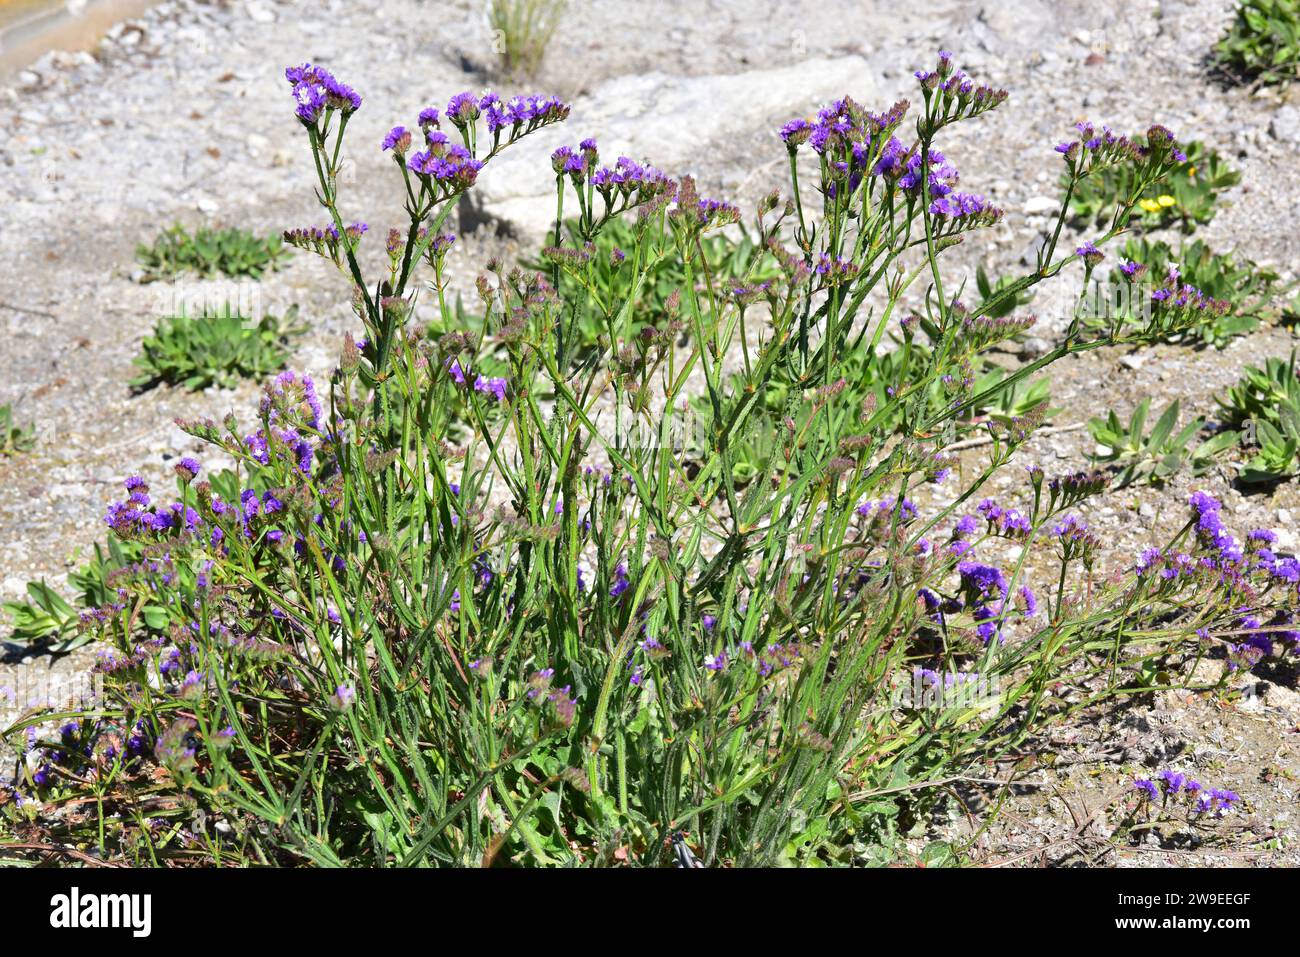 Sea lavender (Limonium sinuatum) is a perennial herb native to south Spain, Canary Islands, north Africa and Palestine. Stock Photo